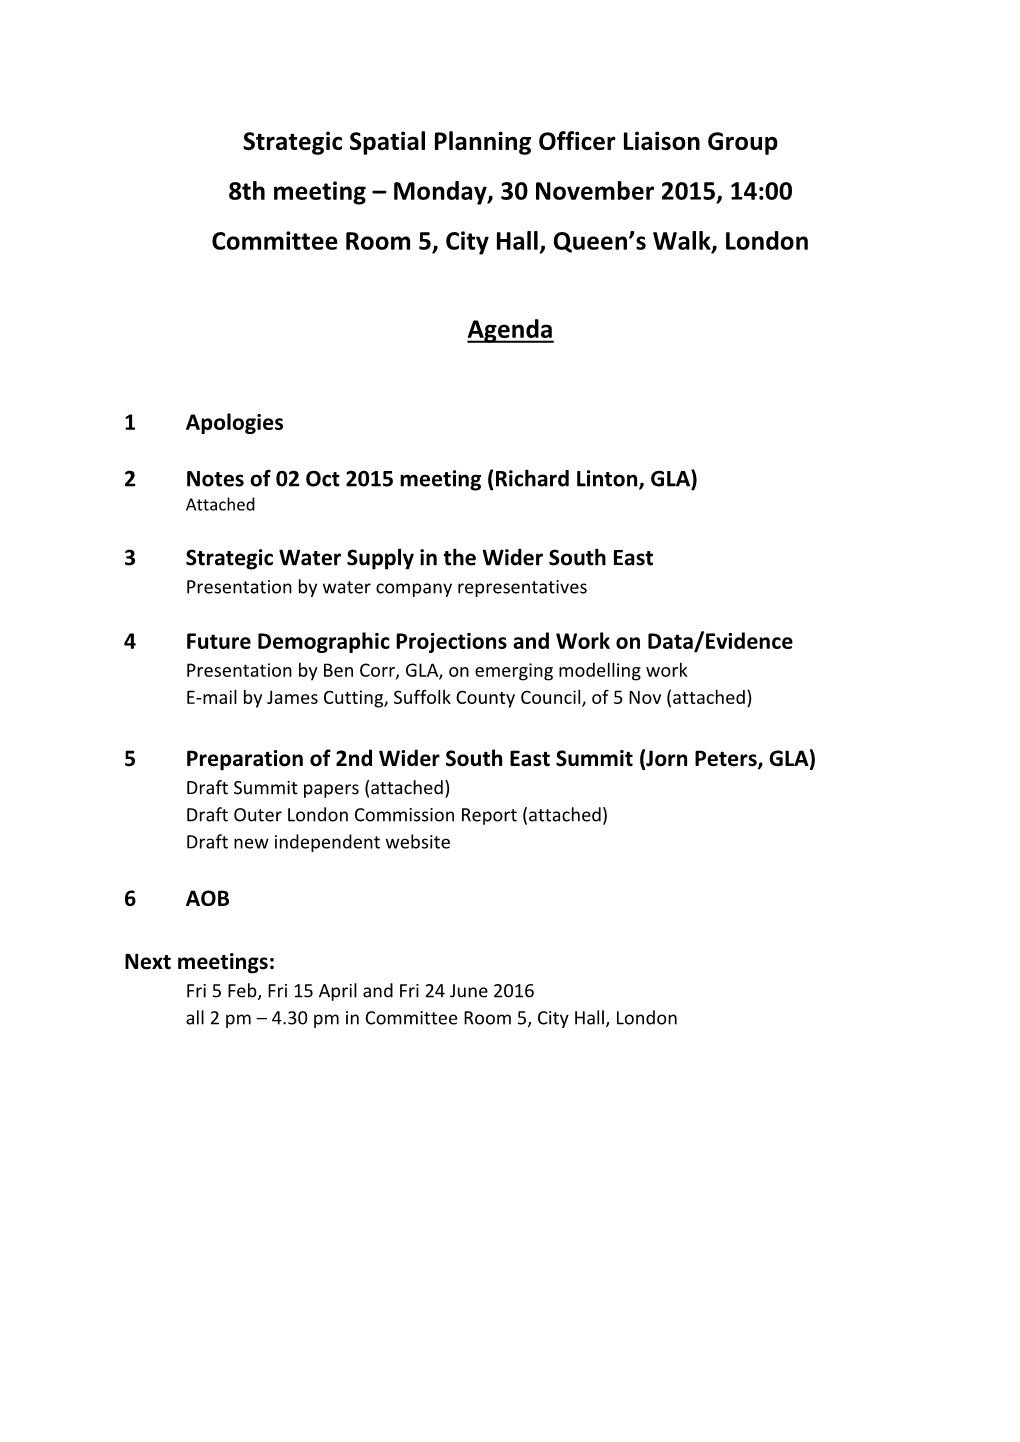 Strategic Spatial Planning Officer Liaison Group 8Th Meeting – Monday, 30 November 2015, 14:00 Committee Room 5, City Hall, Queen’S Walk, London